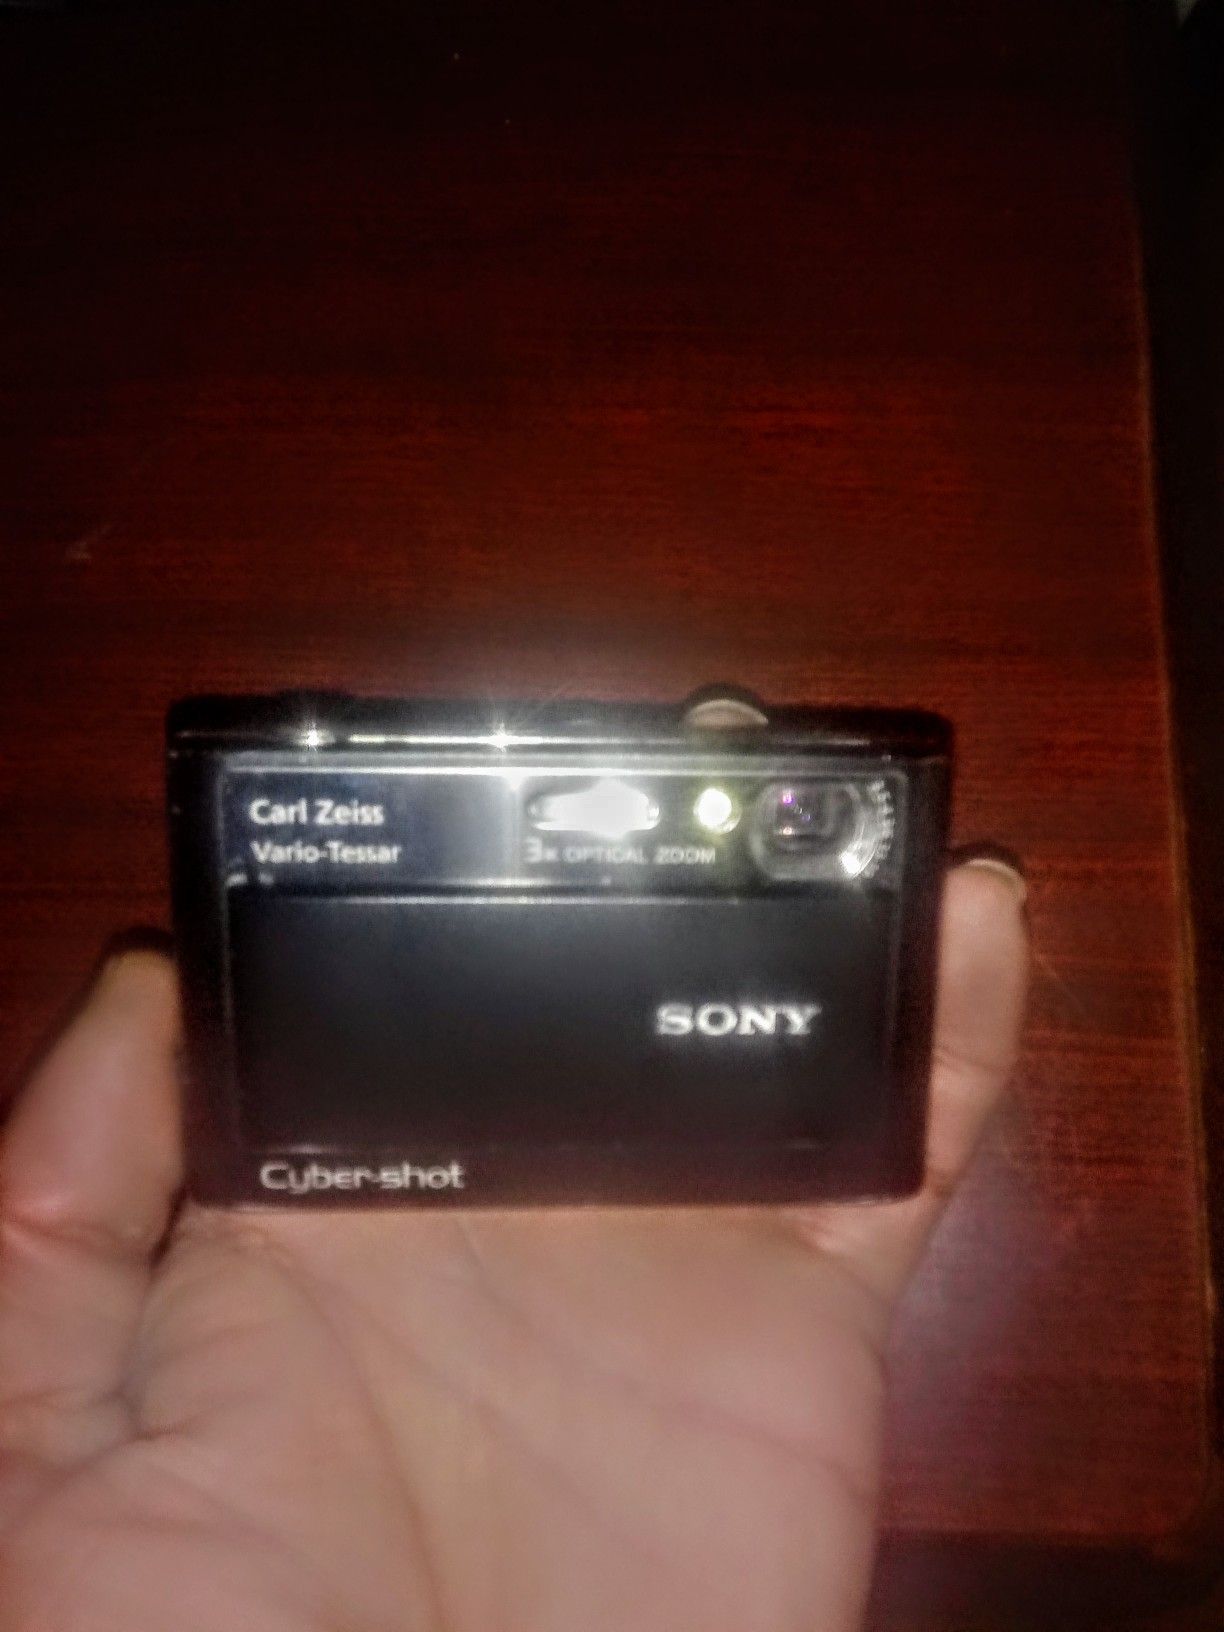 Sony Digital camera. Vario tessiar. Needs charger cable